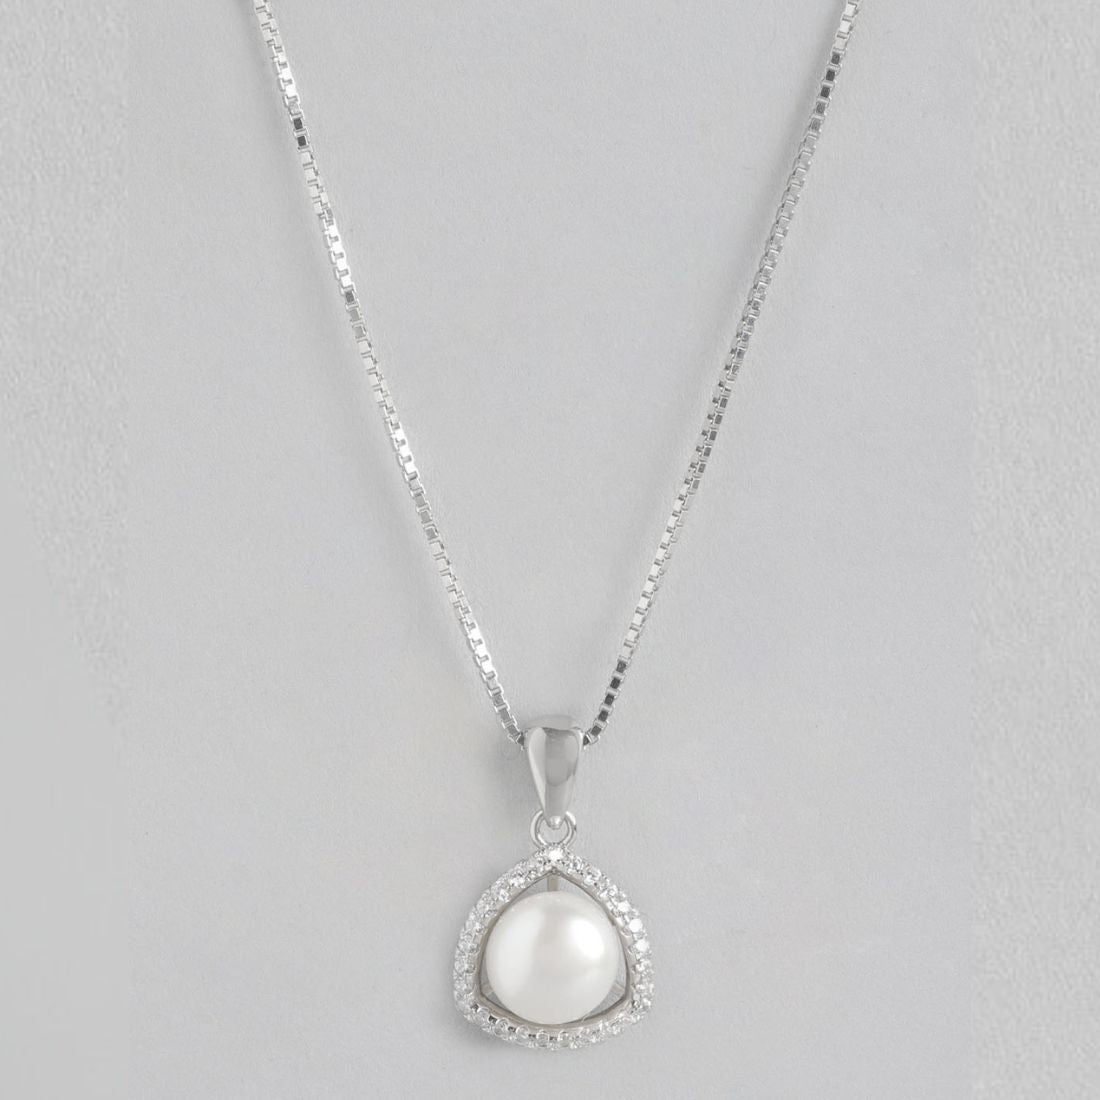 Abstract Elegance Pearl-CZ Rhodium-Plated 925 Sterling Silver Necklace